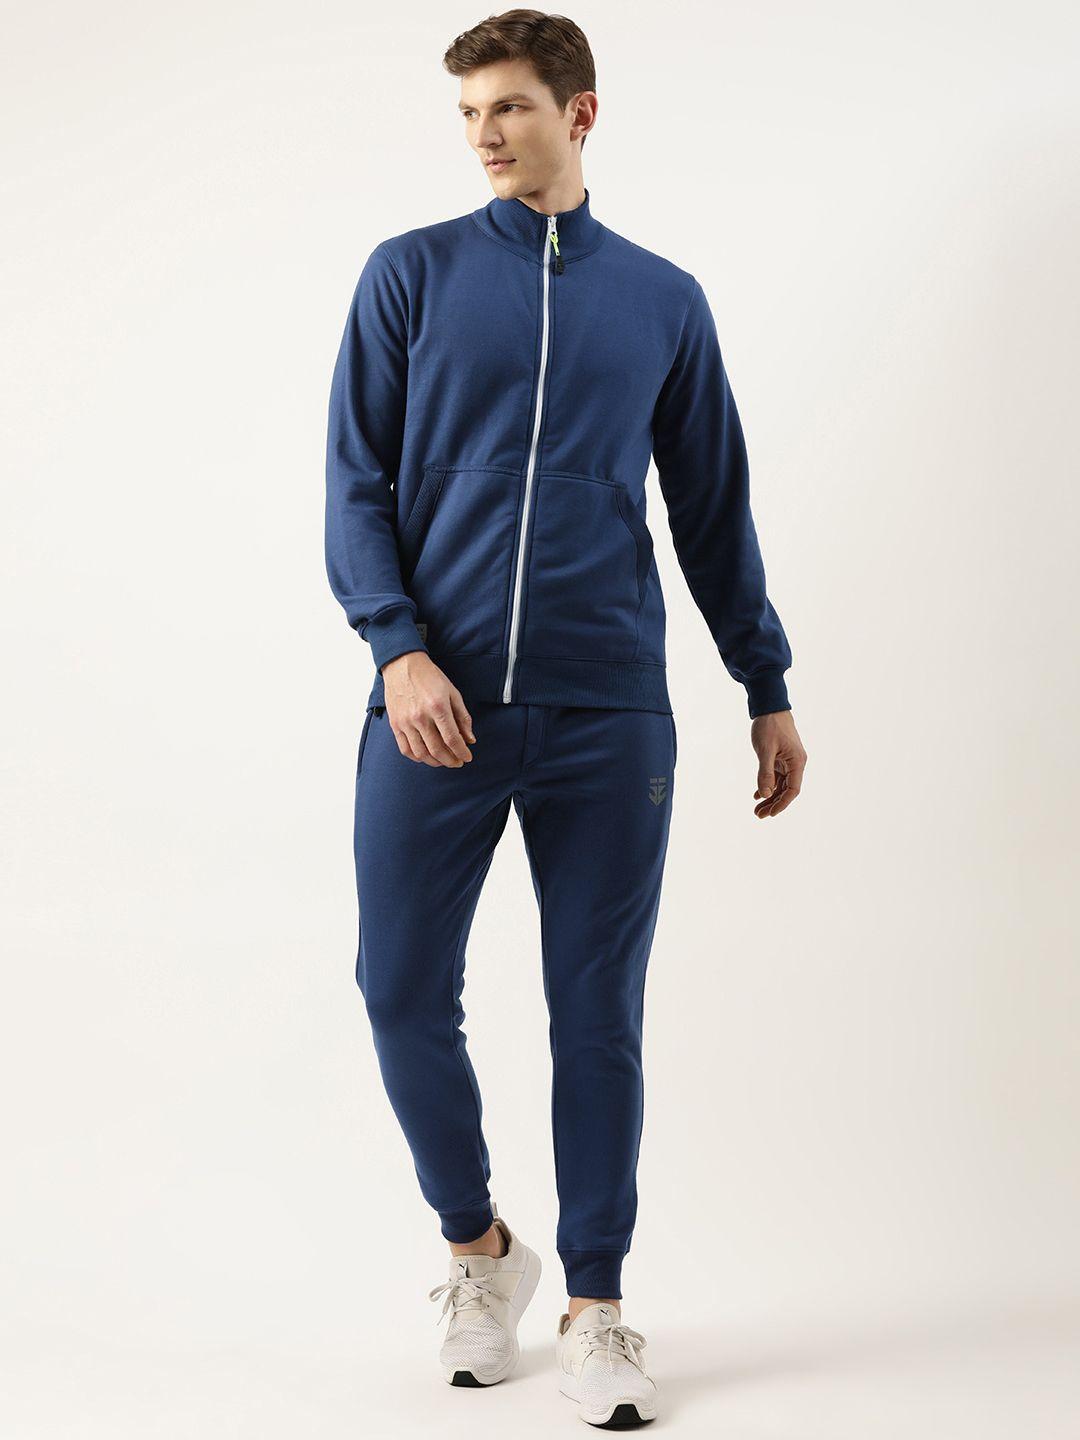 sports52 wear men solid knitted regular fit tracksuit